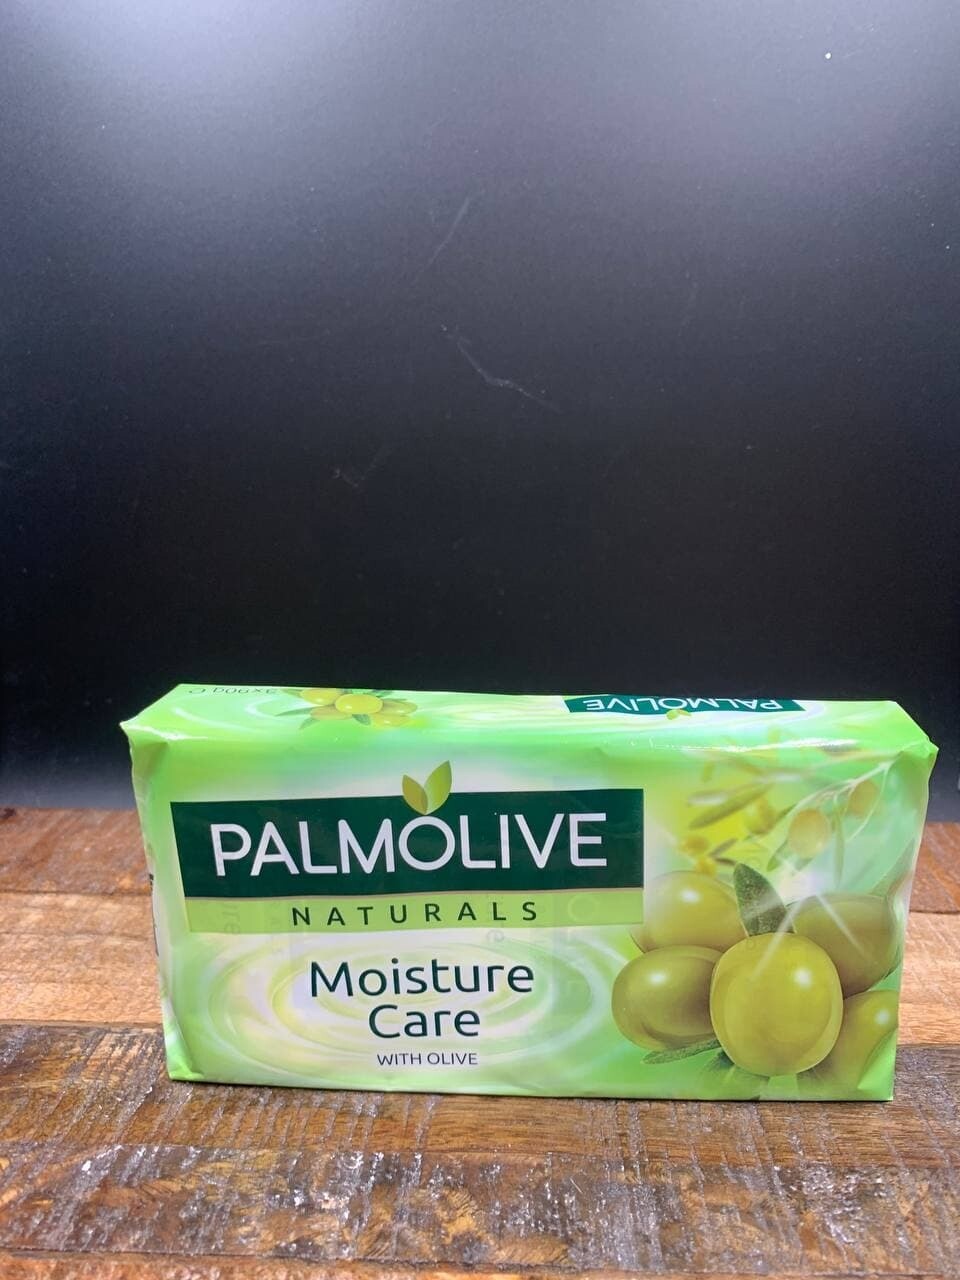 Palmolive Naturals Moisture Care With Olive 3 Pack